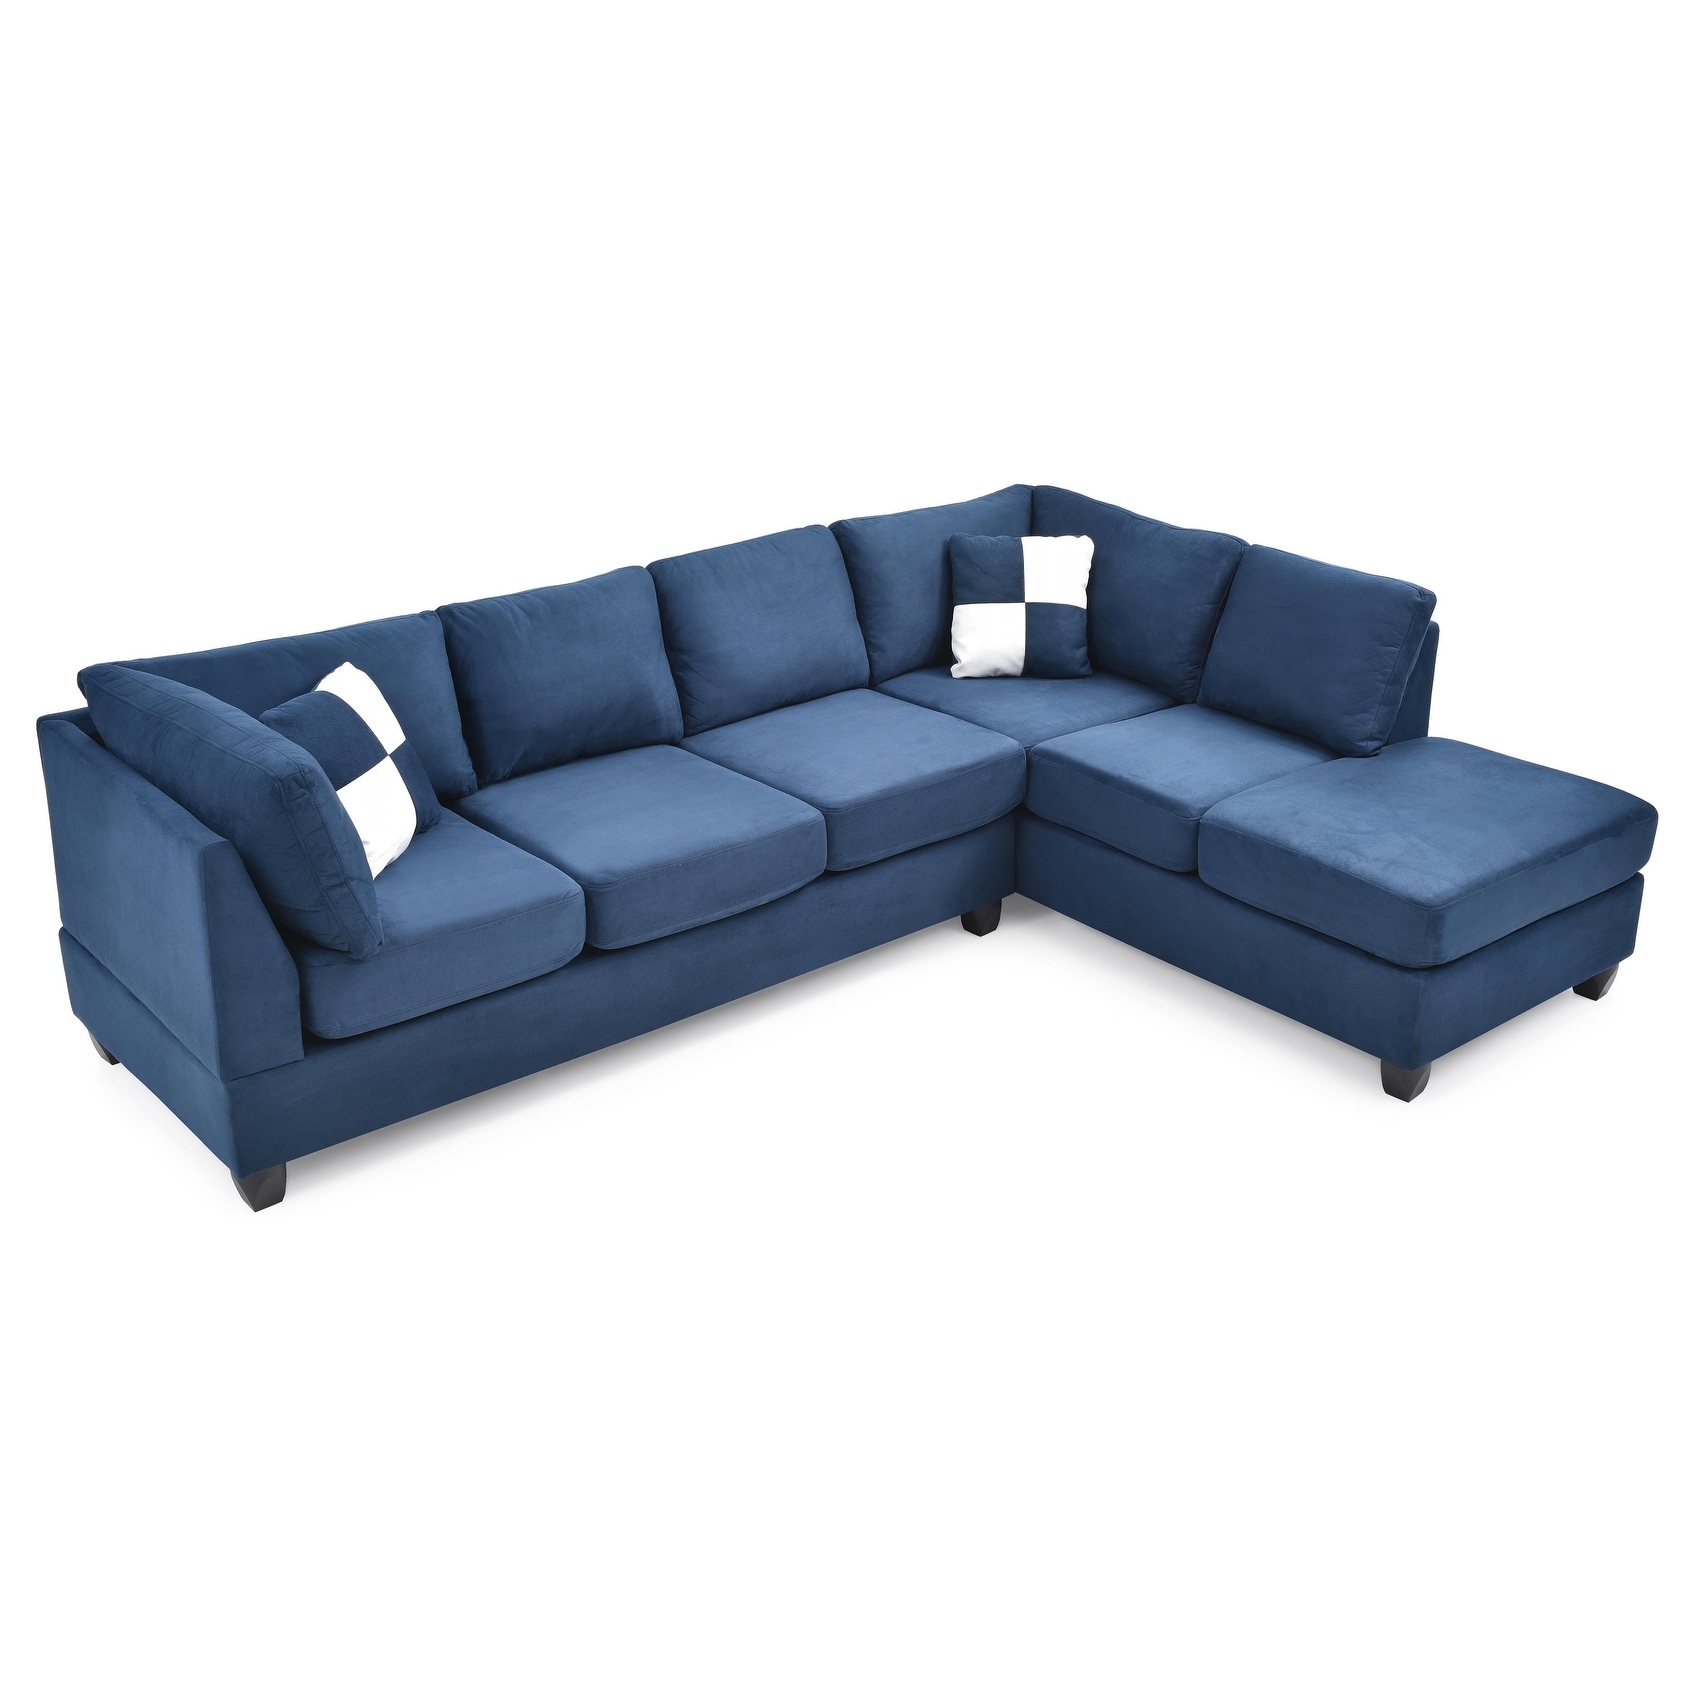 Passion Furniture Malone 111 in. Suede 4-Seater Sectional Sofa with 2-Throw Pillow - 111"L x 78"W x 34"H Option 2